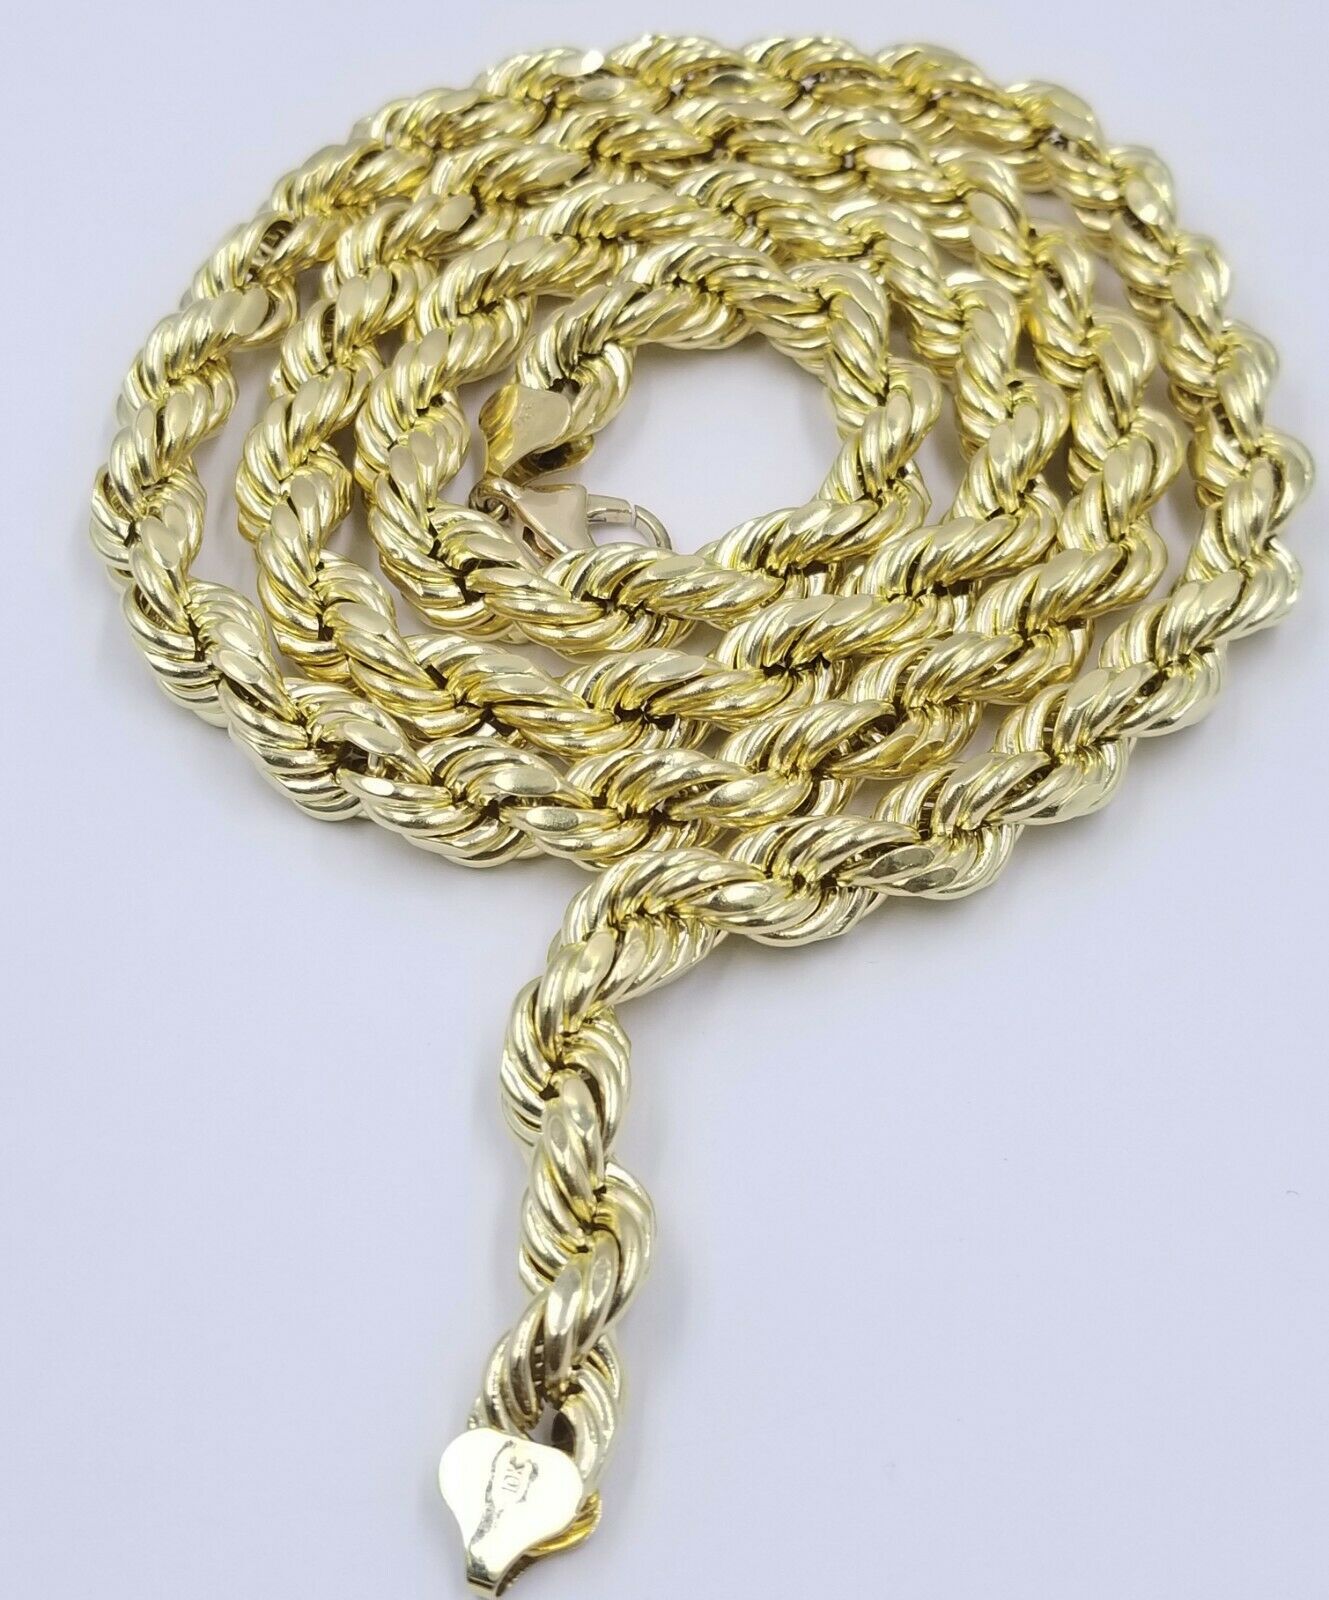 Real 10K Gold Rope Chain Mens Necklace 10mm 20-30 inch Diamond Cut Yellow Gold 24 inch